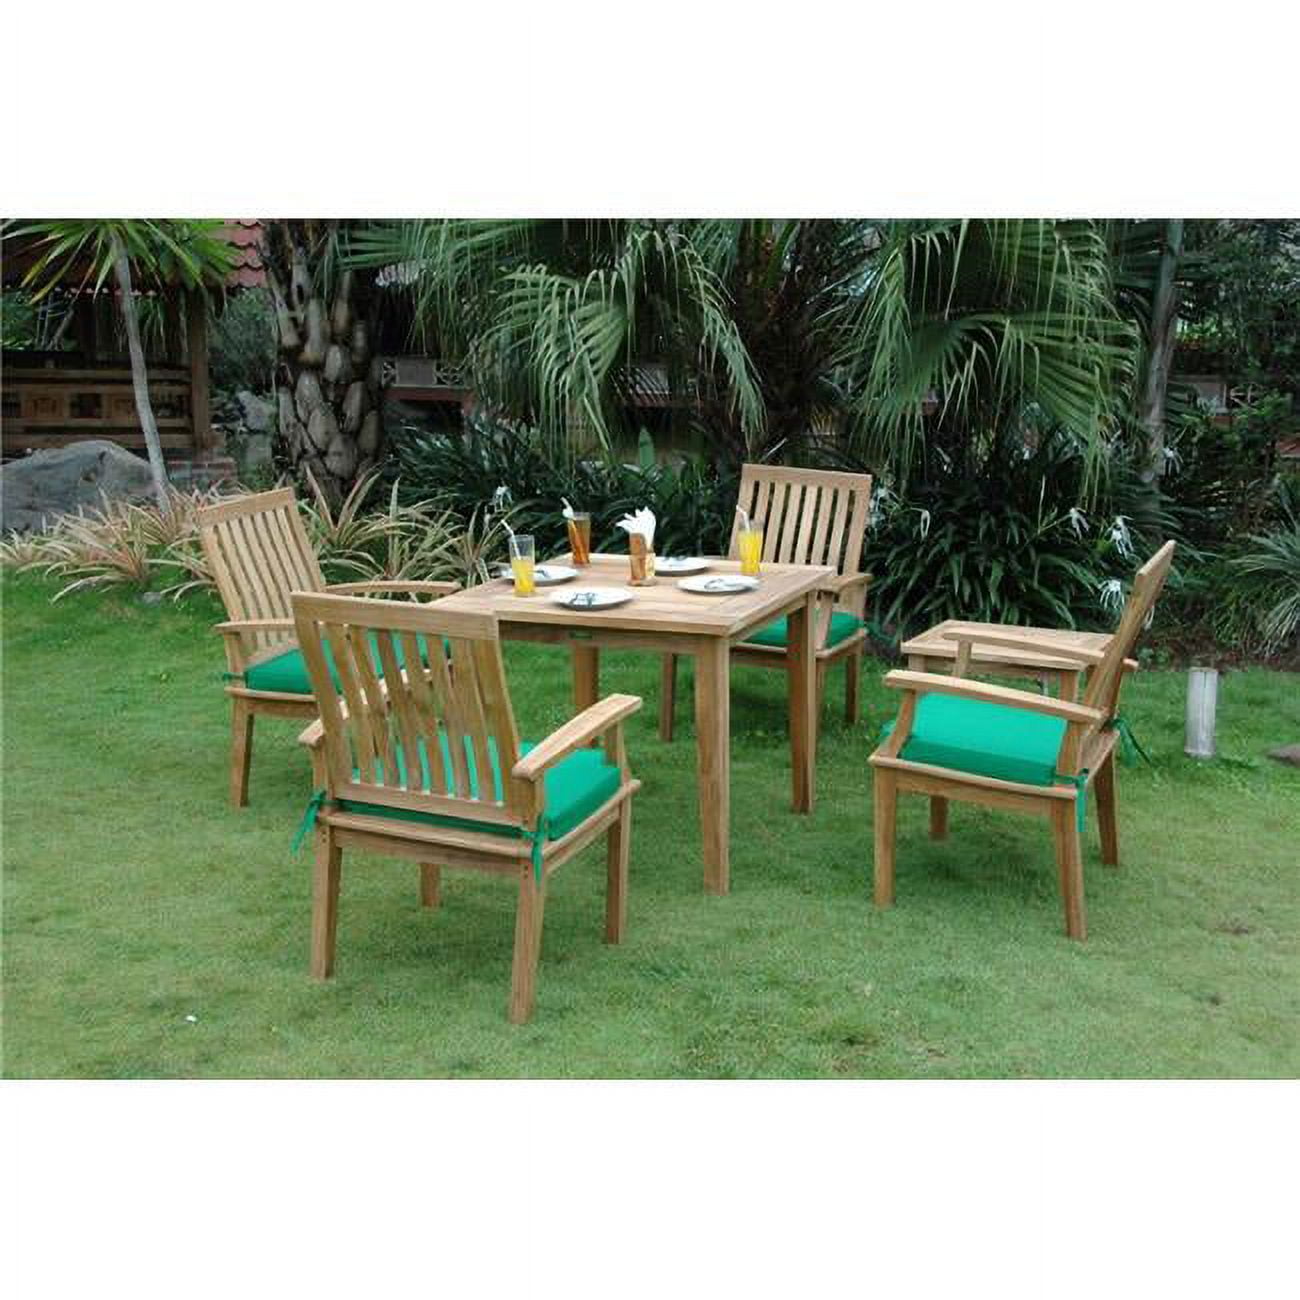 Set-117 35 In. Square Table With Small Slats